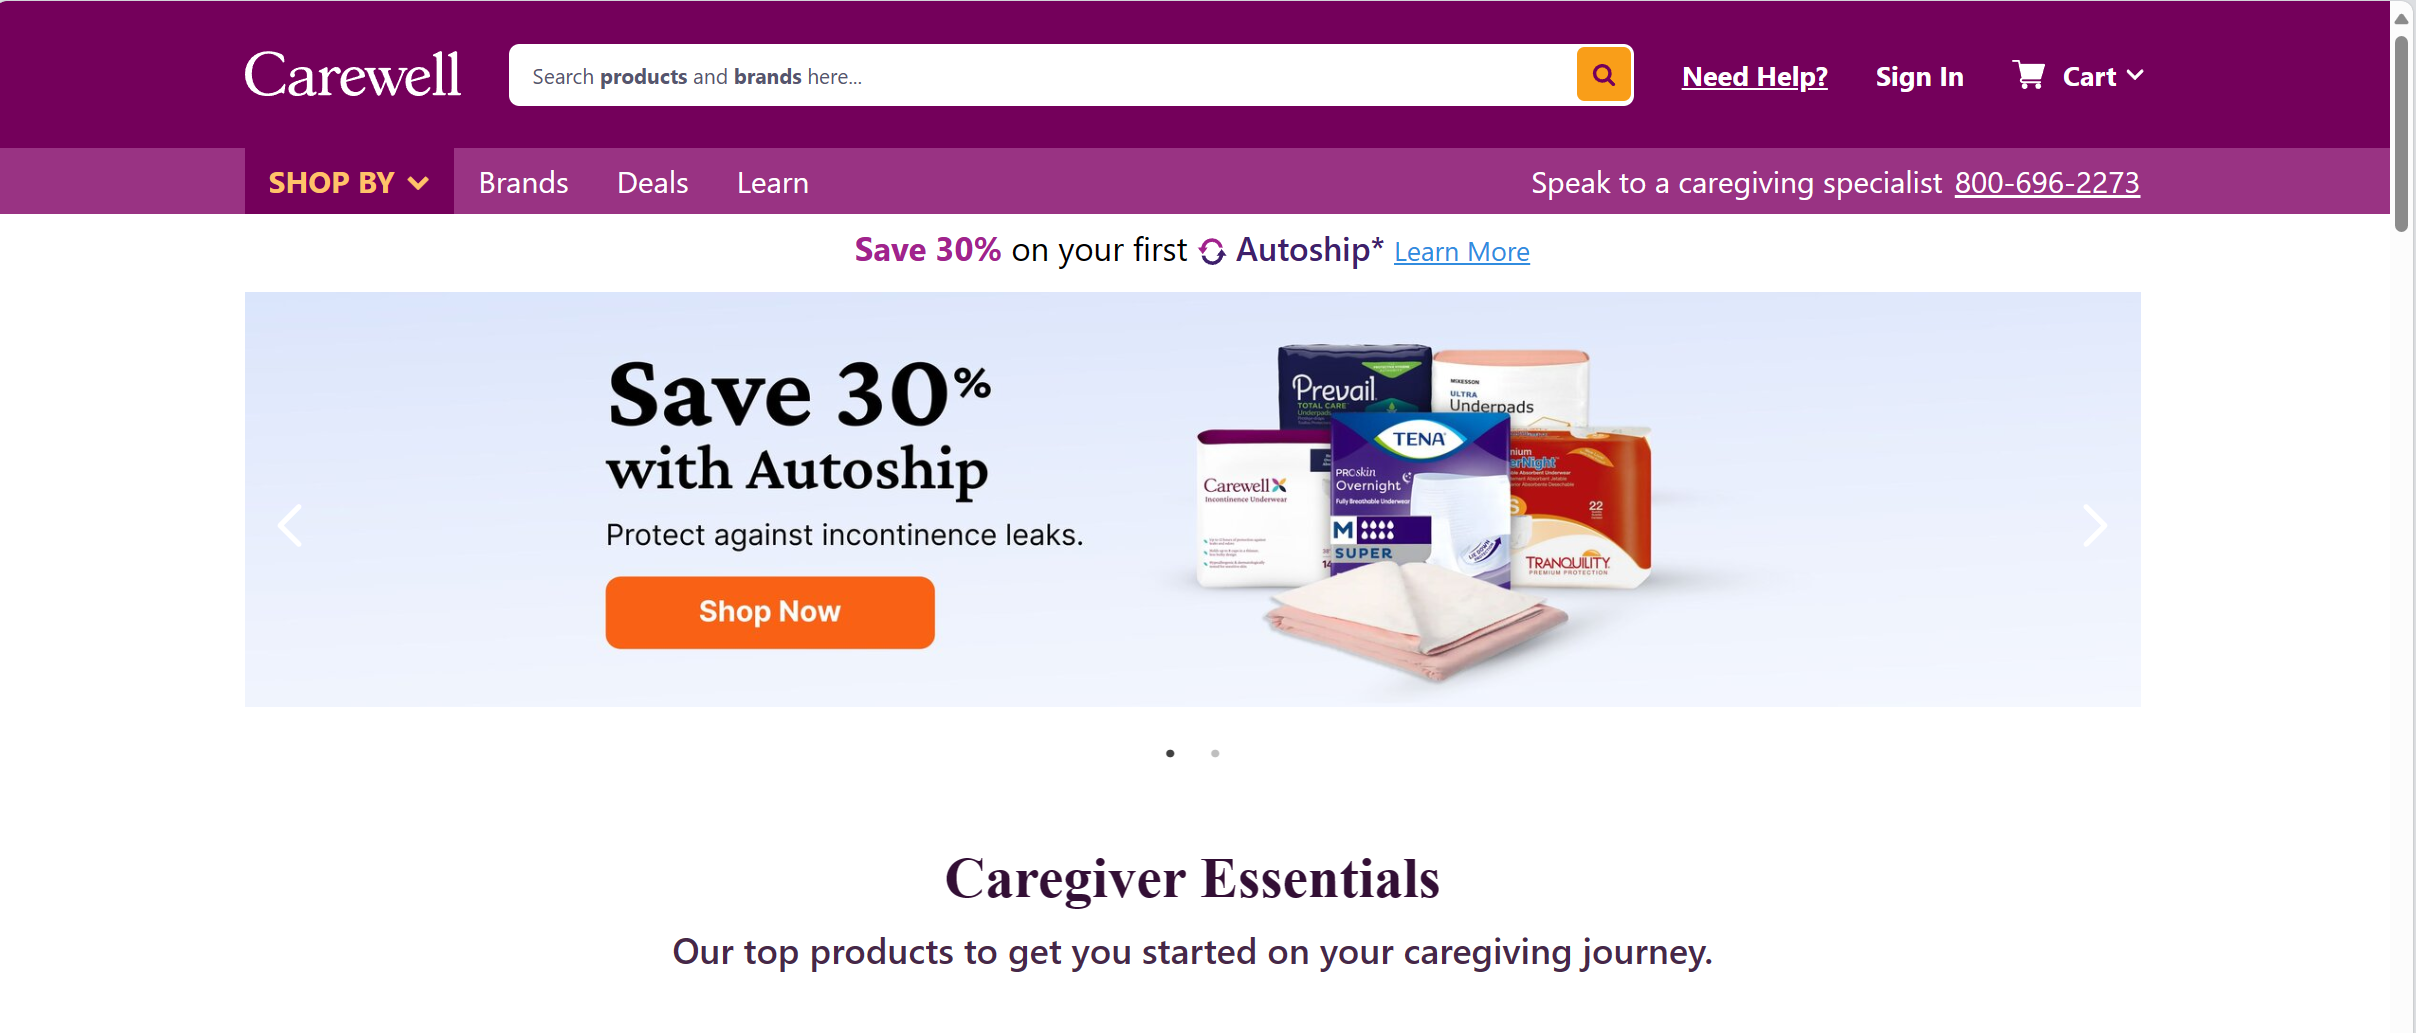 Carewell.com website products